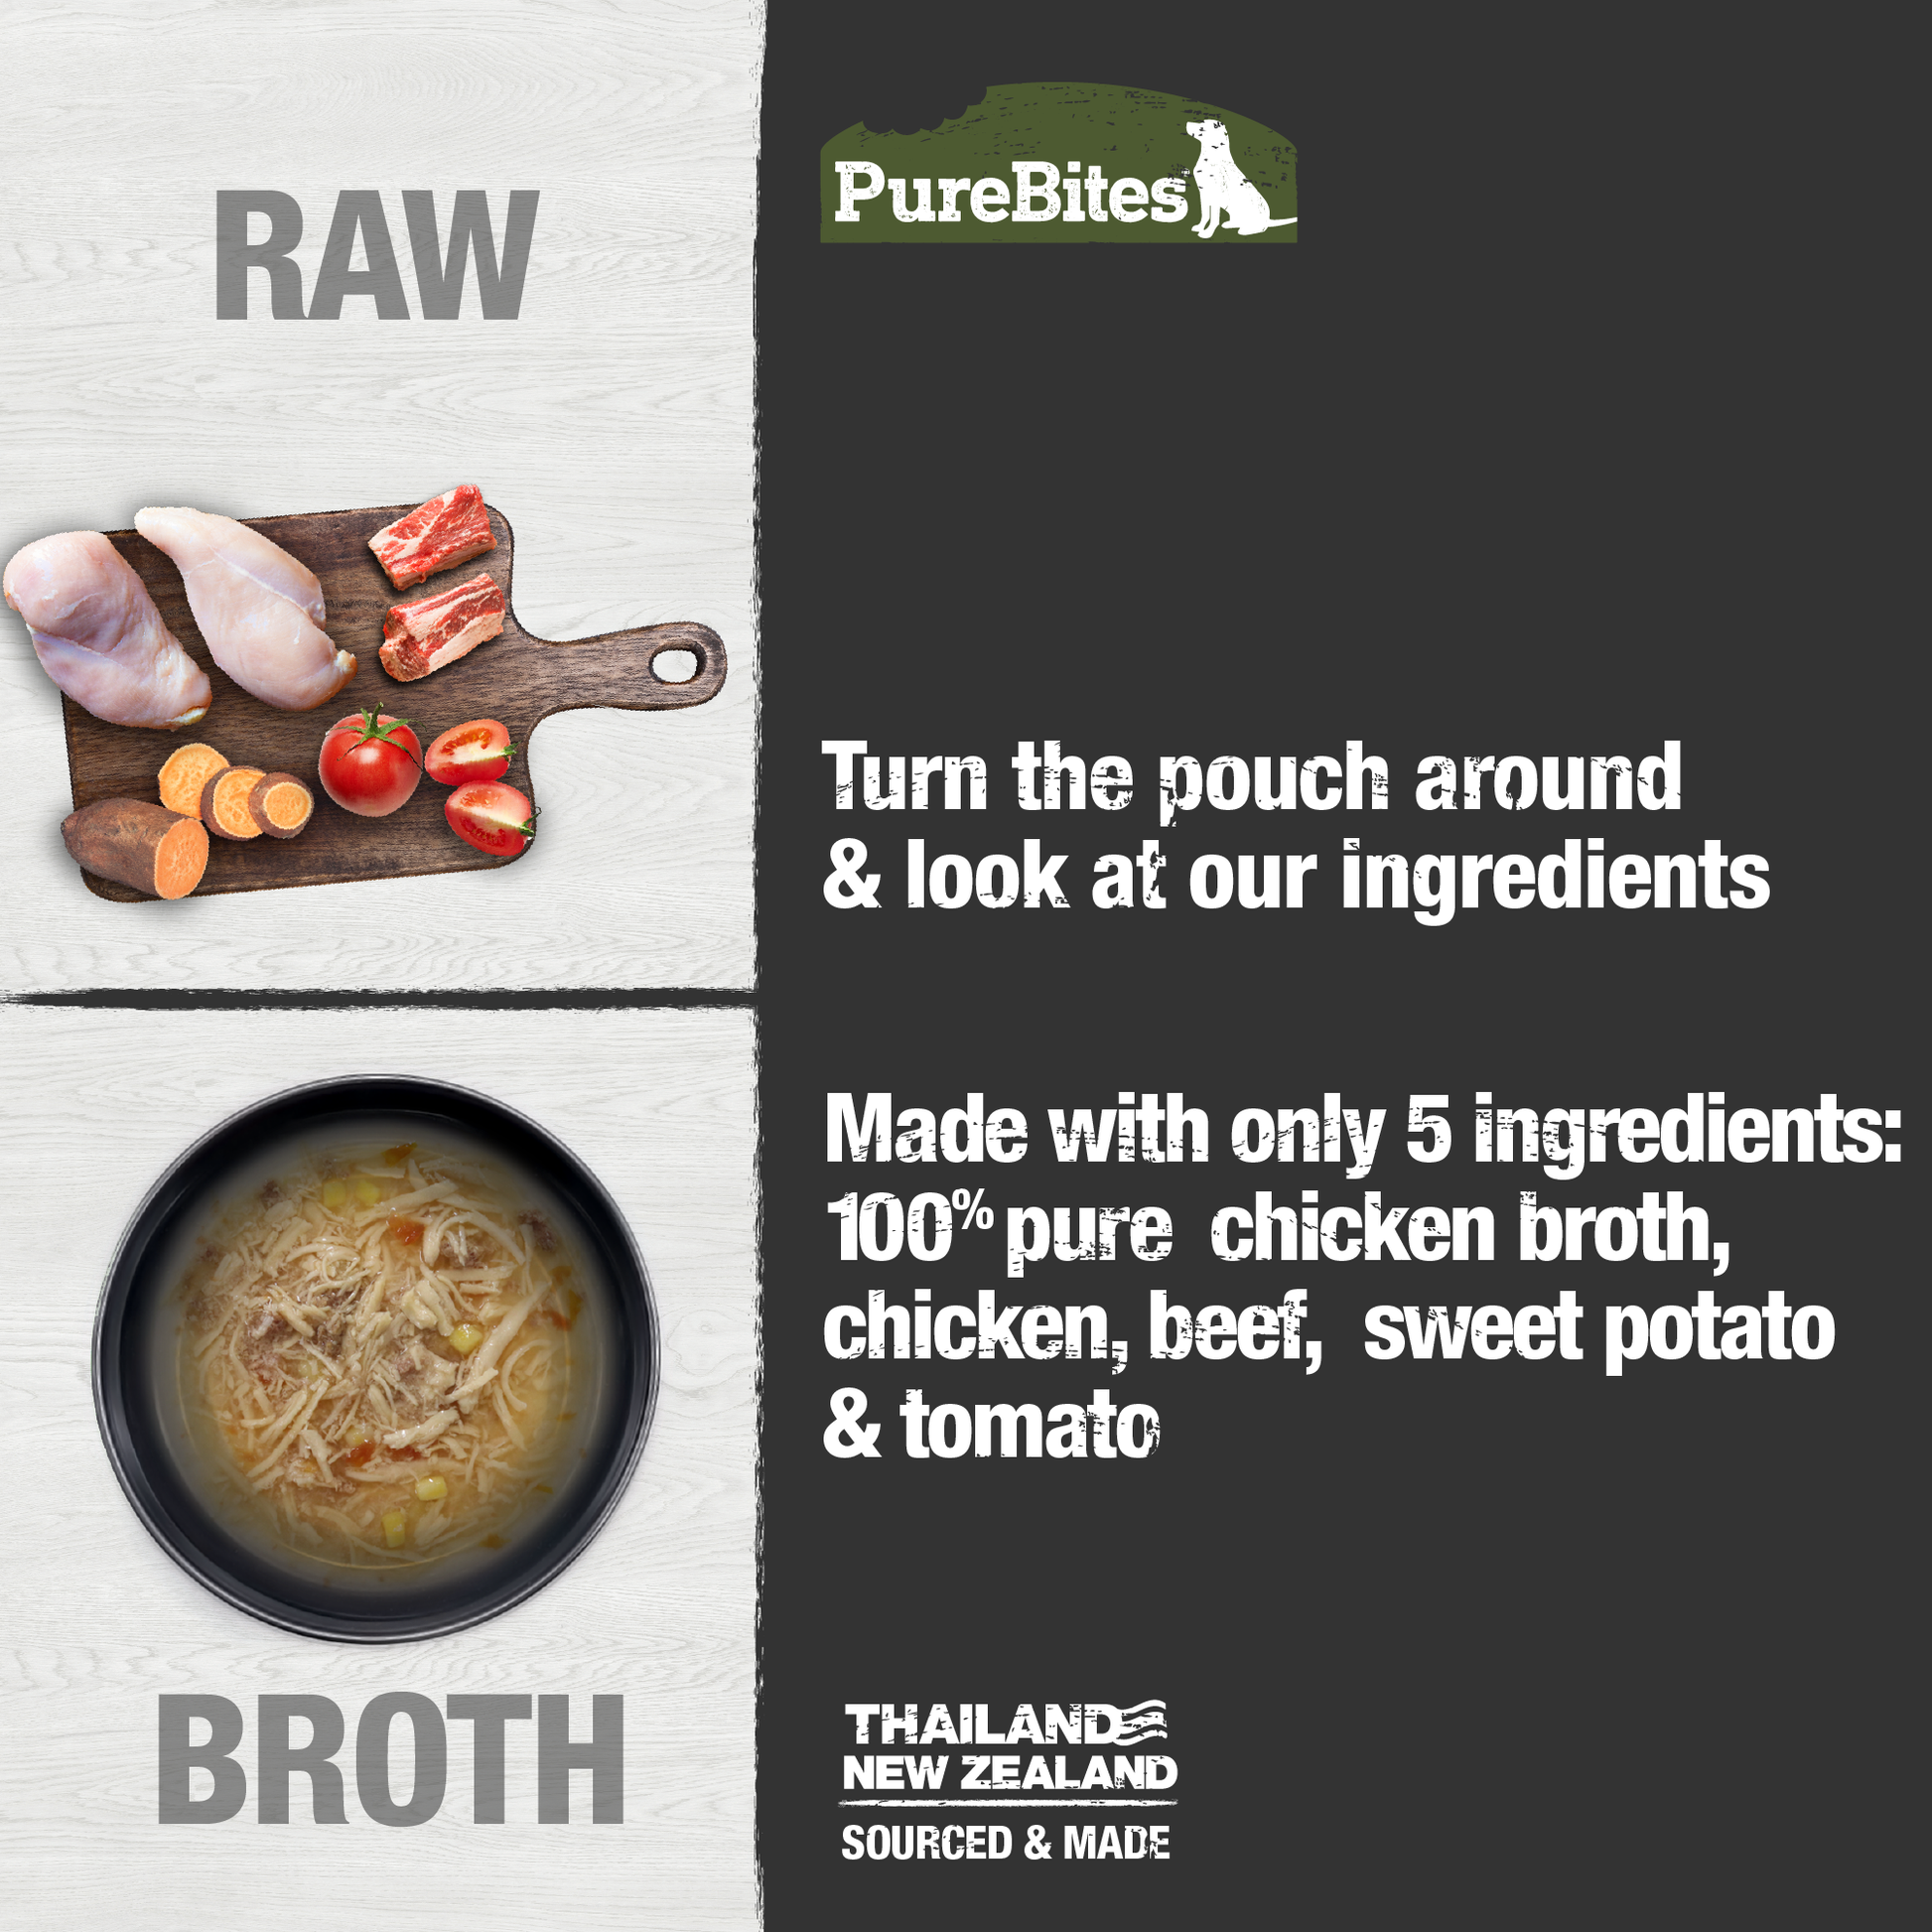 Made with only 5 Ingredients you can read, pronounce, and trust: Chicken broth, chicken, beef, sweet potato, tomato.